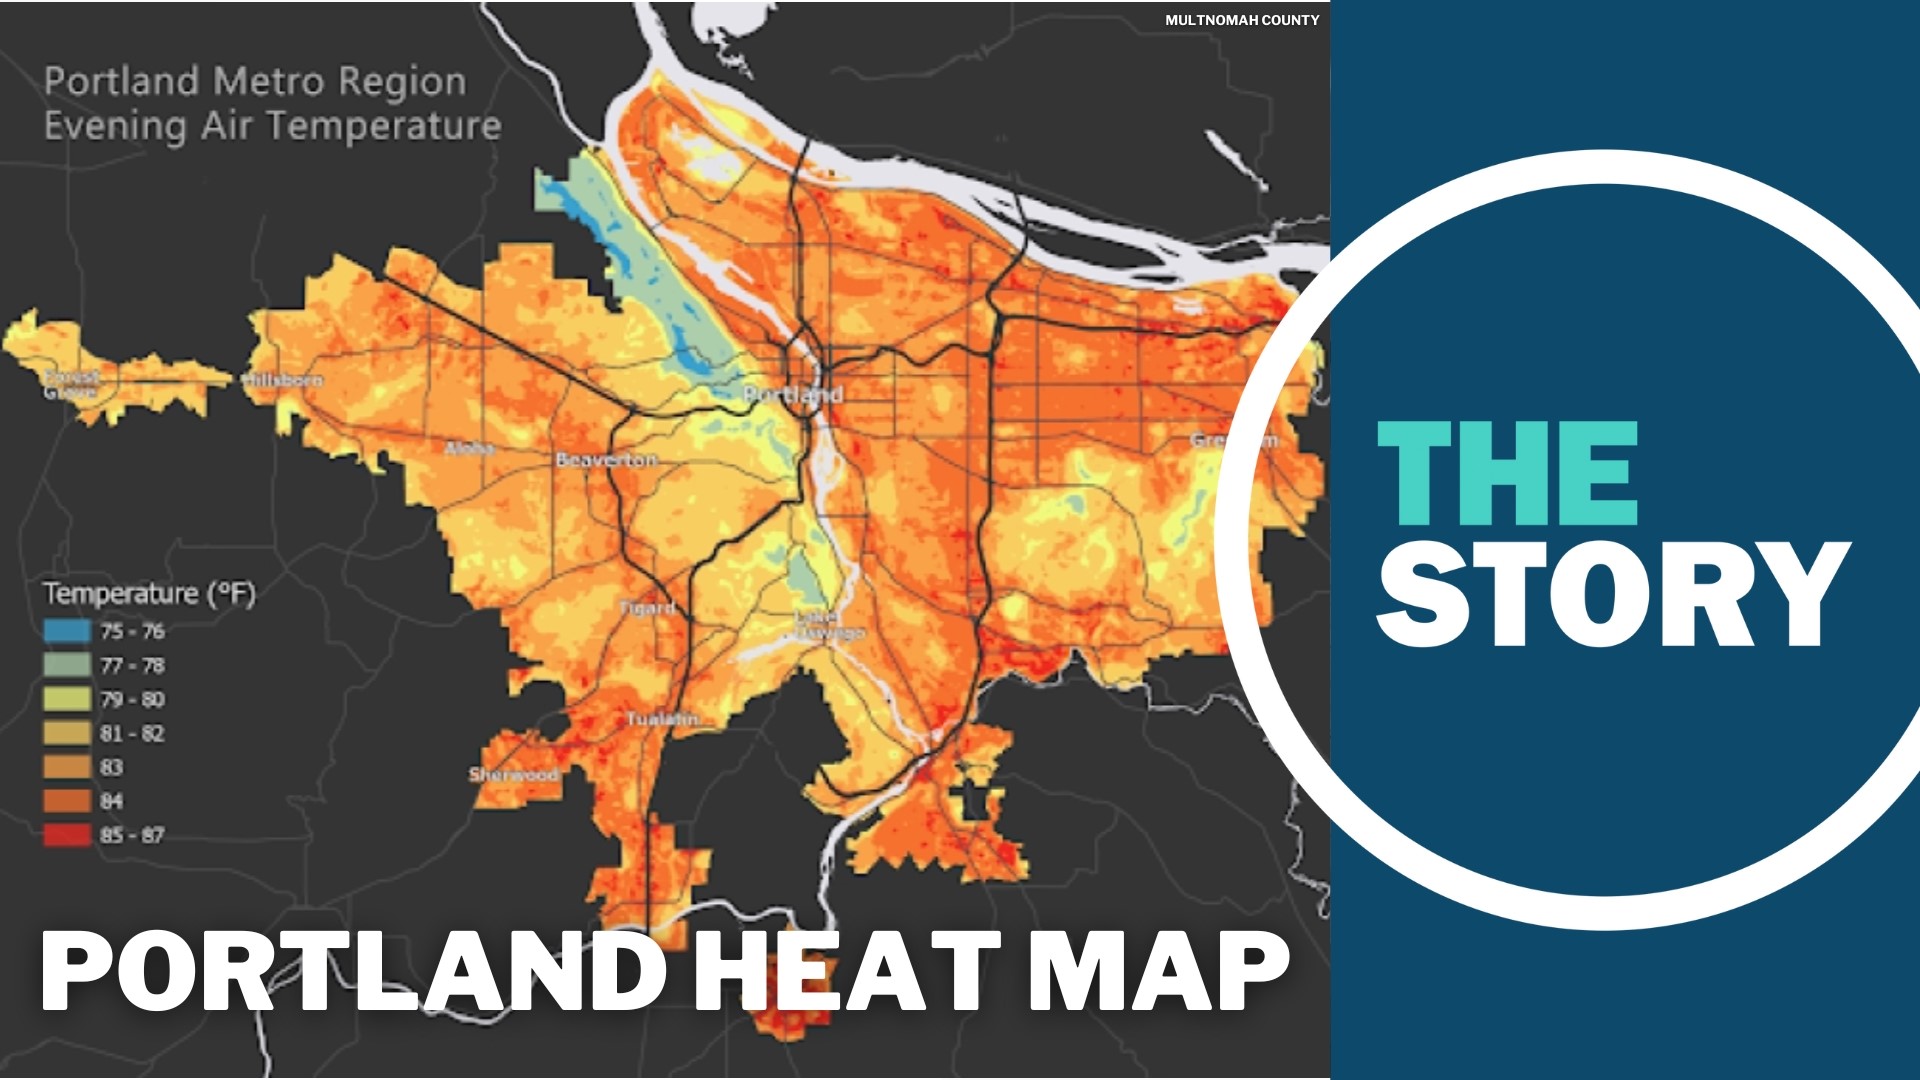 The map highlights areas of the city that tend to get hotter than the rest on warm days – a growing concern due to climate change.